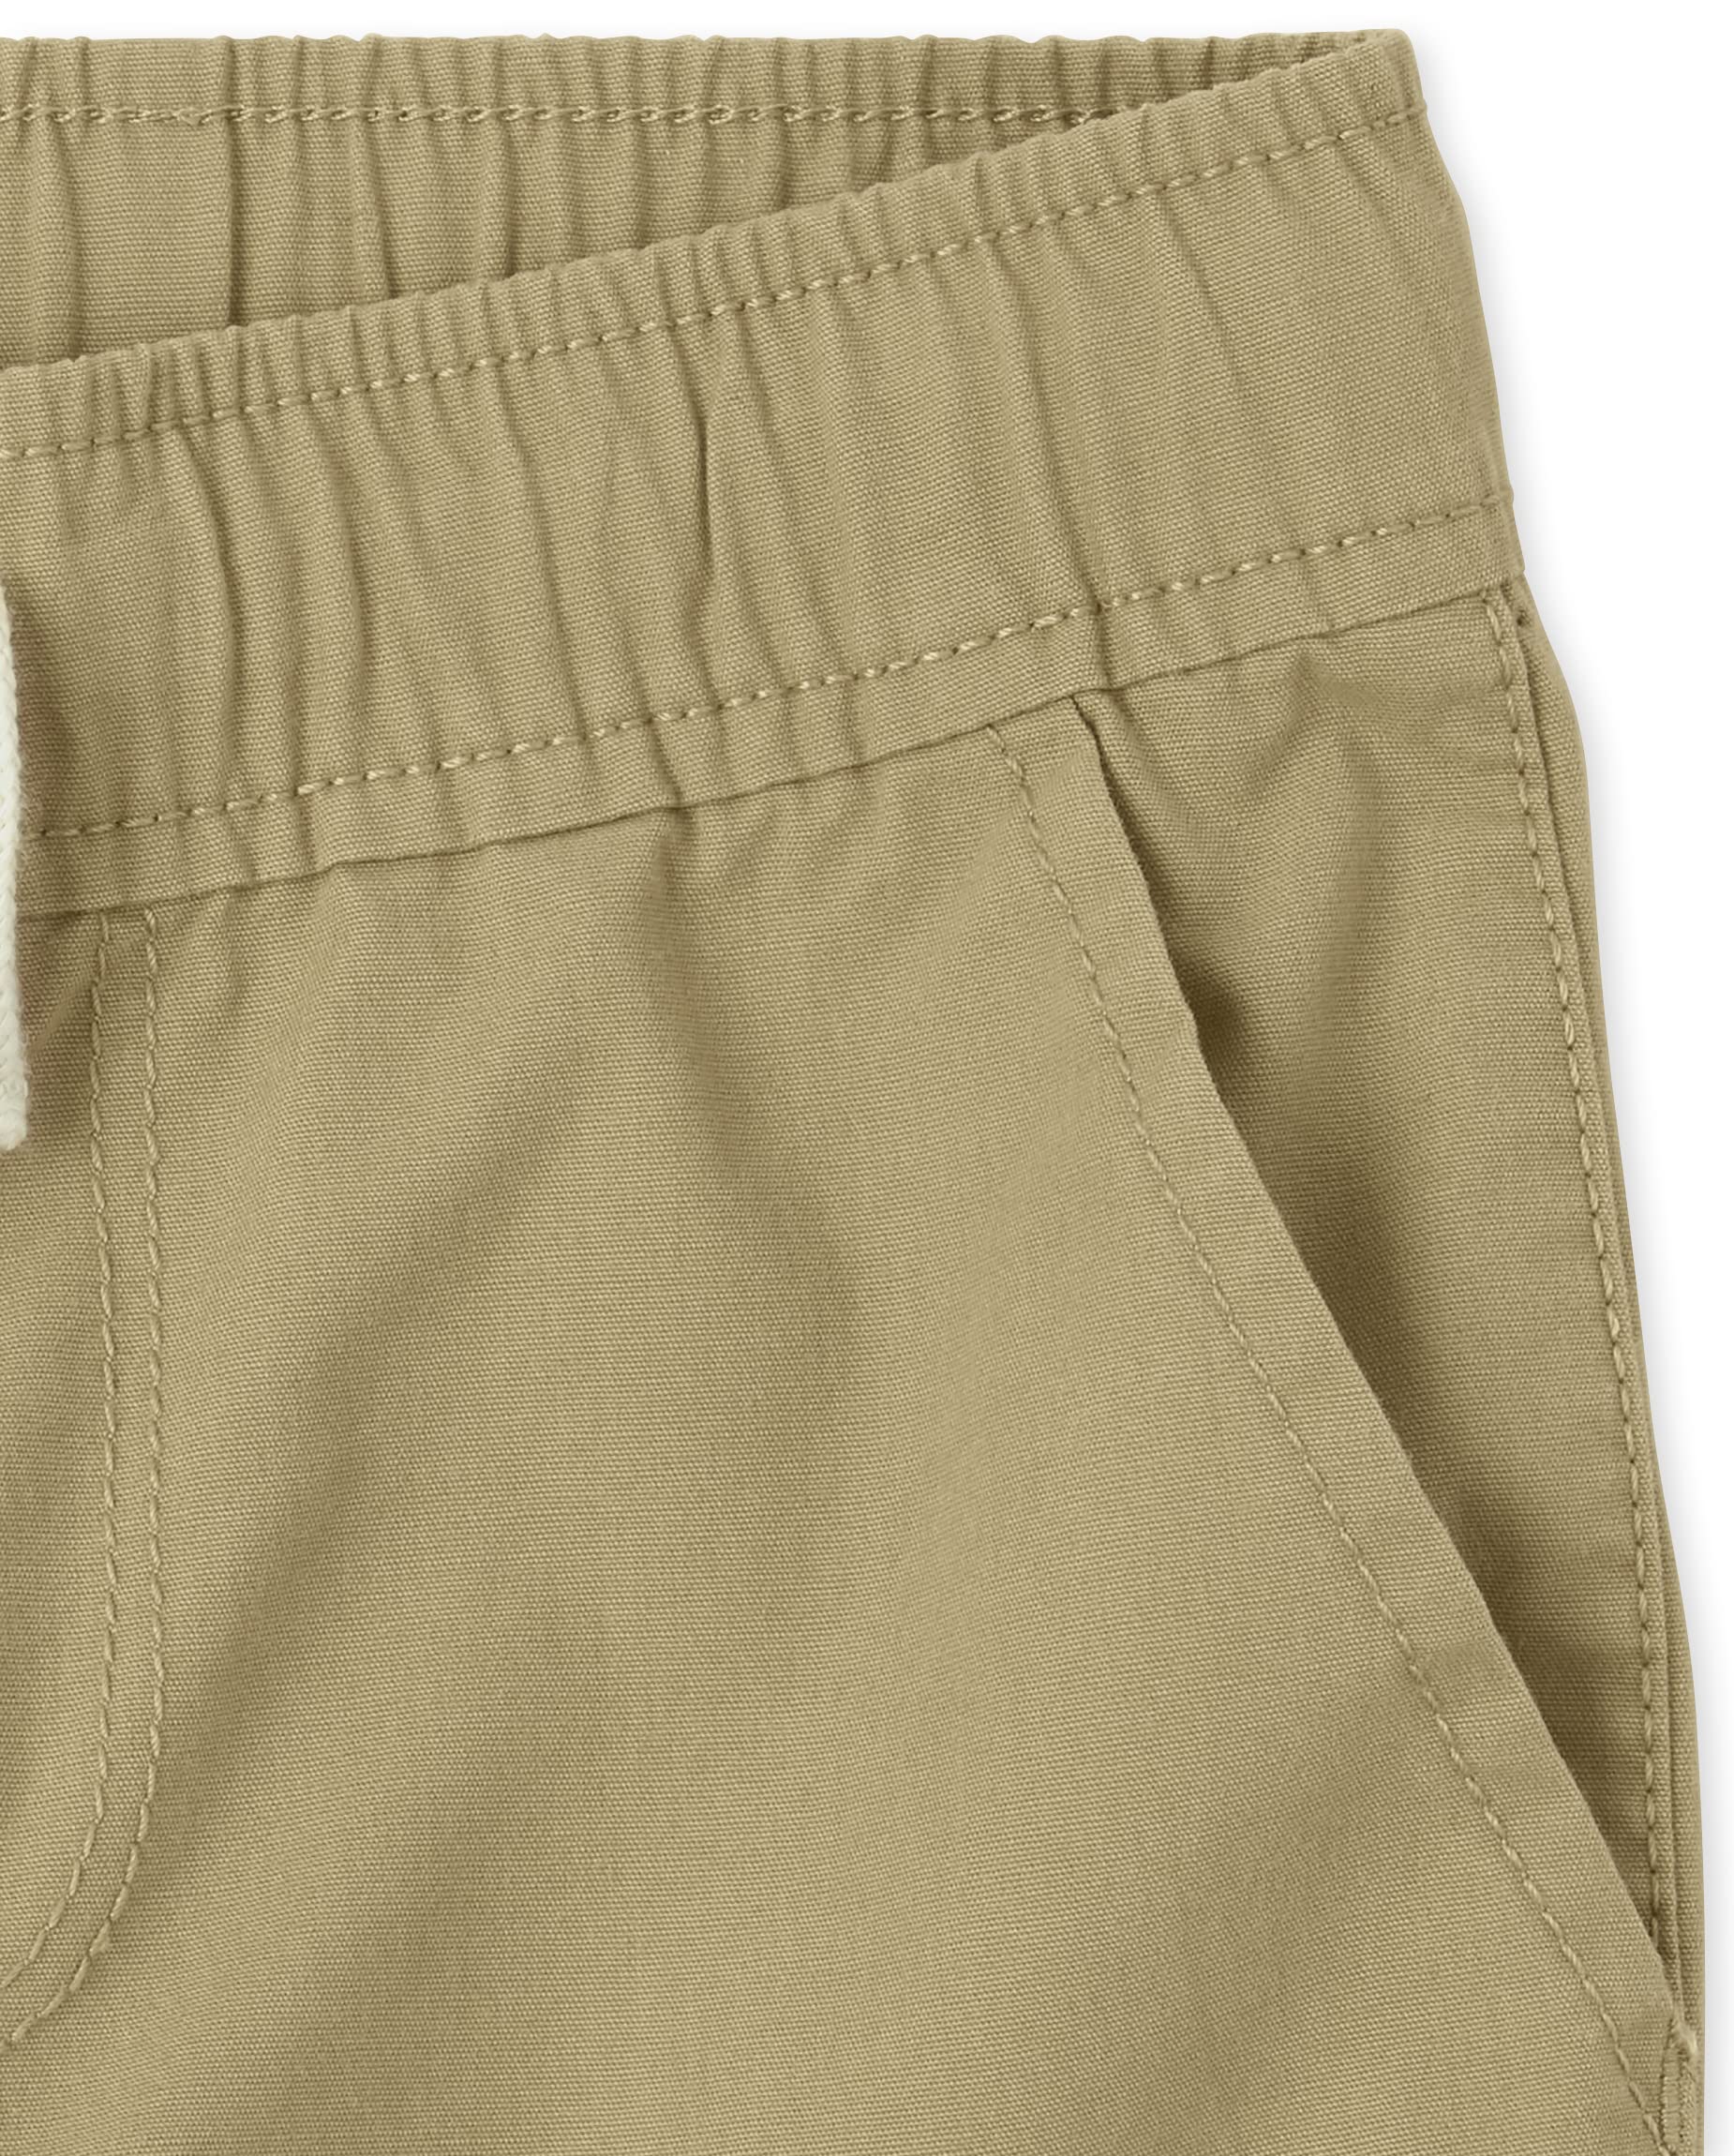 The Children's Place Boys' Pull on Jogger Shorts